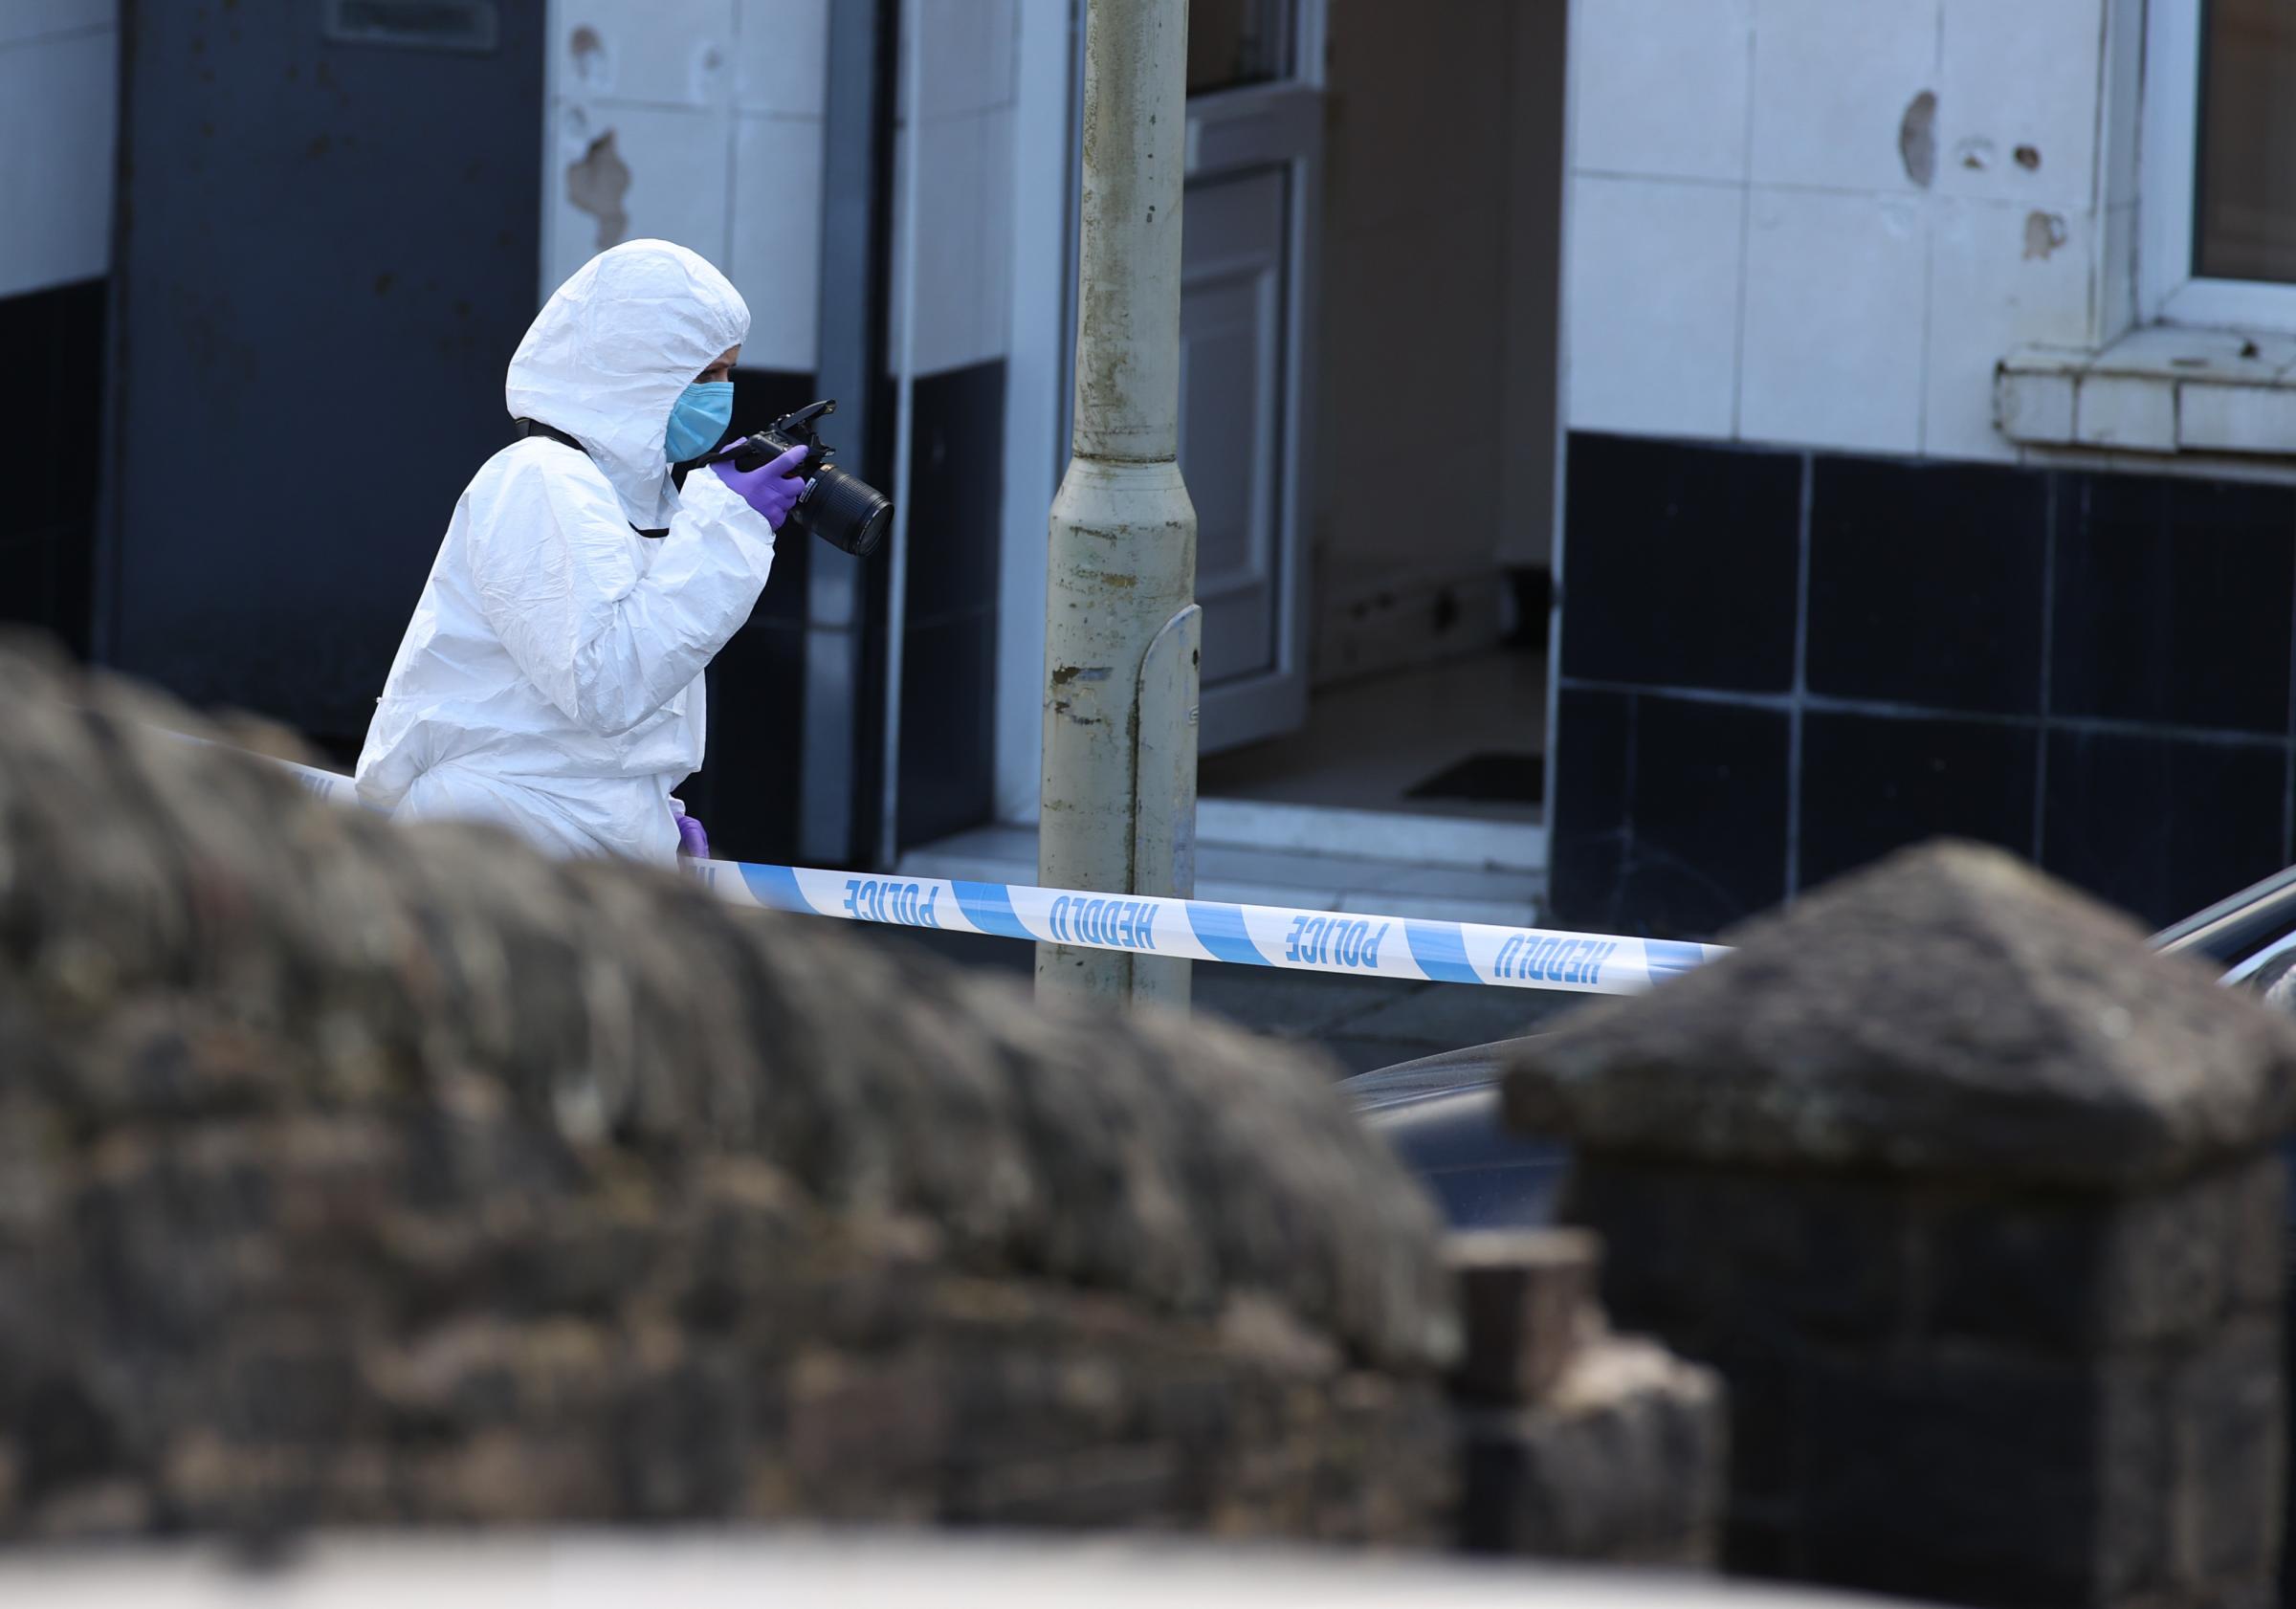 05.03.21 Police Incident, Rhonnda -Police forensic examiners at the scene of serious incident involving a number of casualties outside the Blue Sky takeaway on Baglan Street in Treorchy, Rhondda, South Wales. Credit: Huw Evans Picture Agency